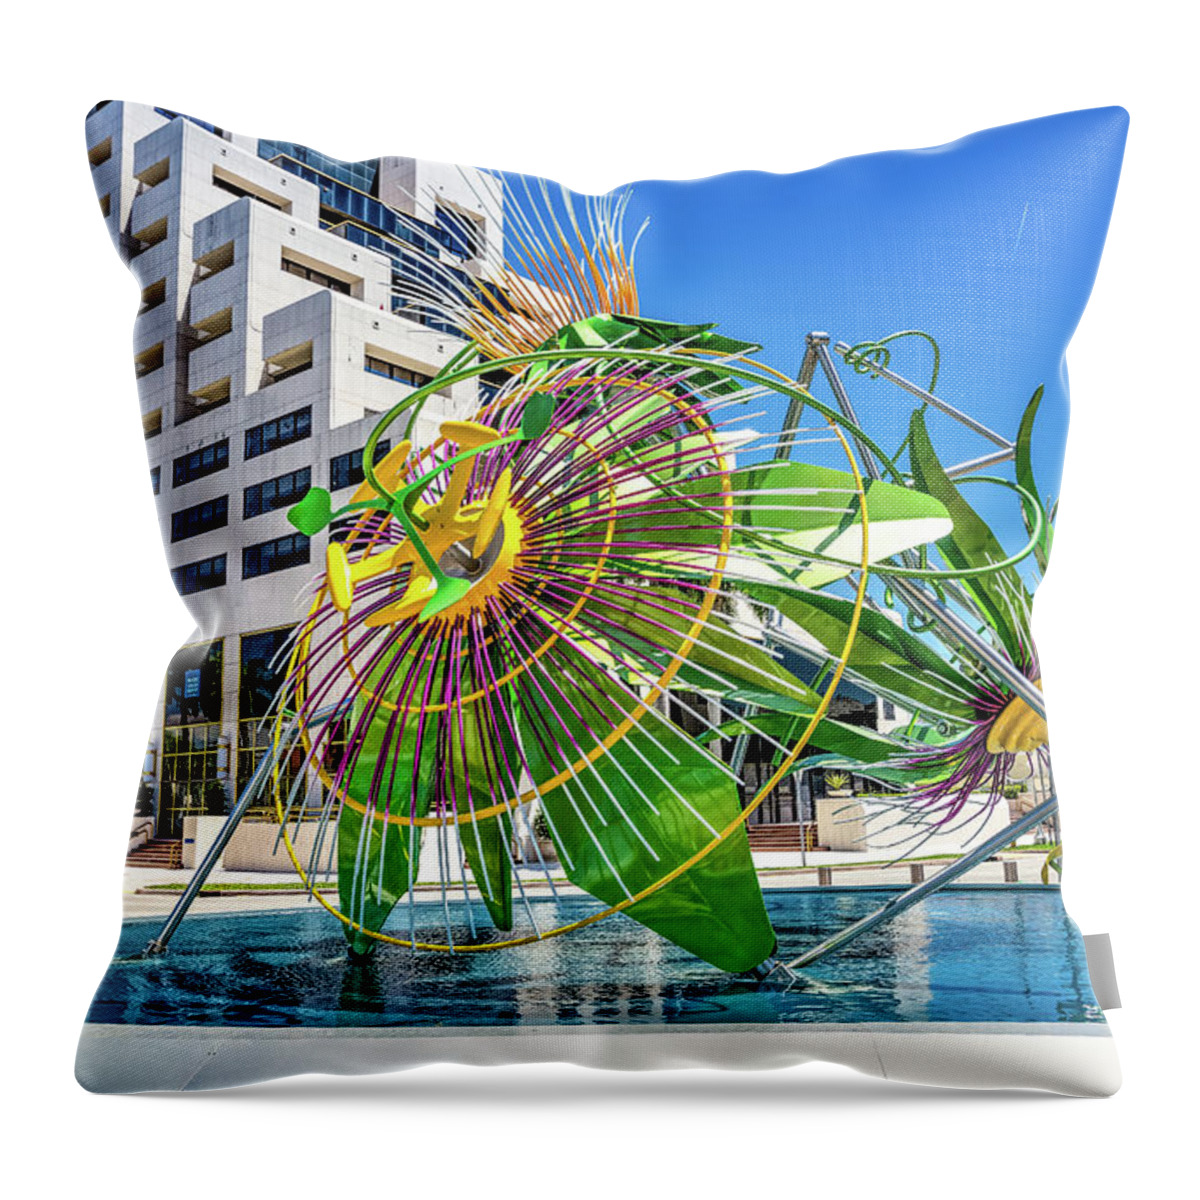 Miami Throw Pillow featuring the digital art Coral Gables The Bug by SnapHappy Photos